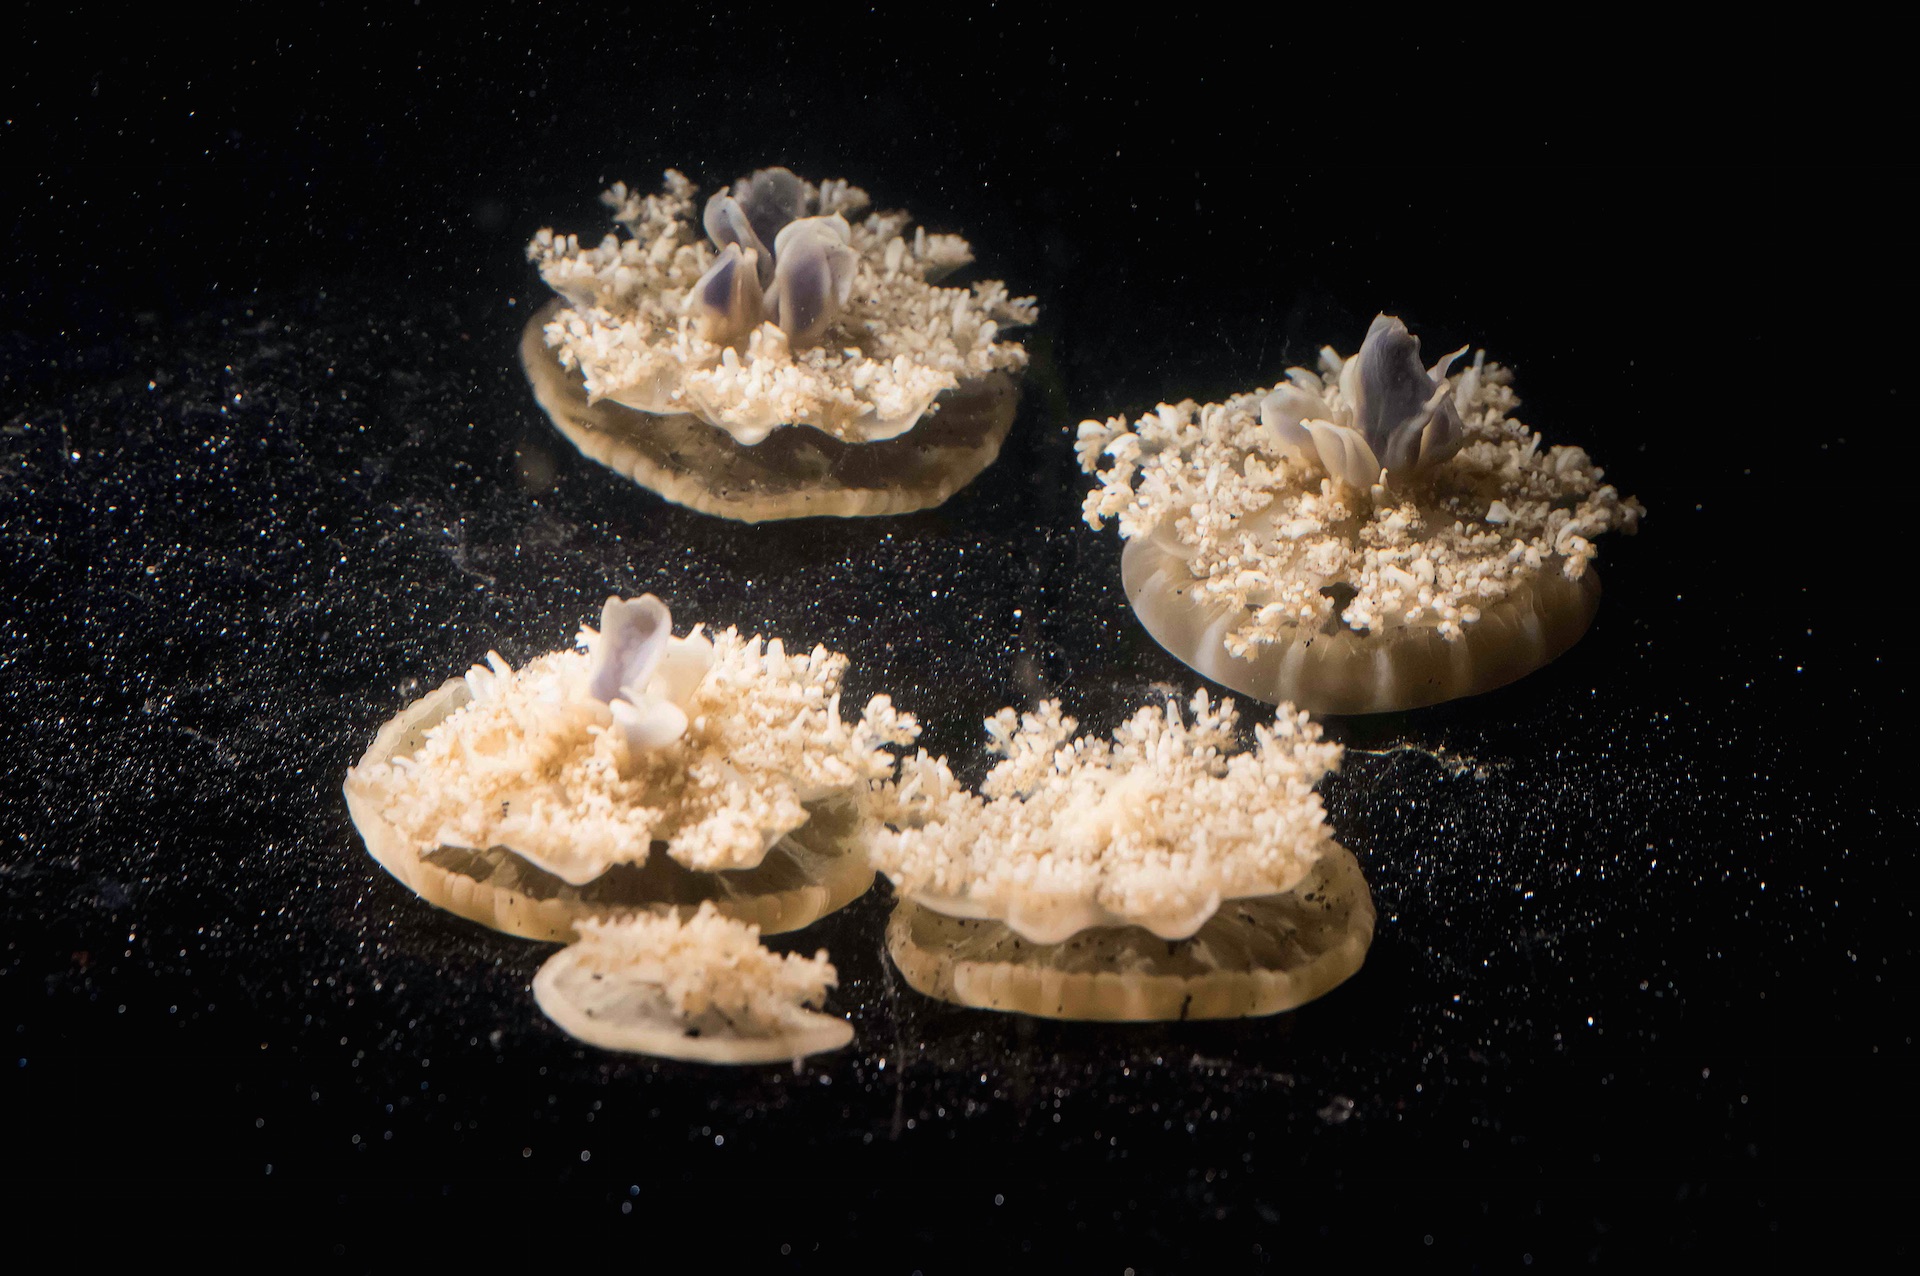 Jellyfish prefer to sit upside down on the floor of their tank. Credit: Caltech